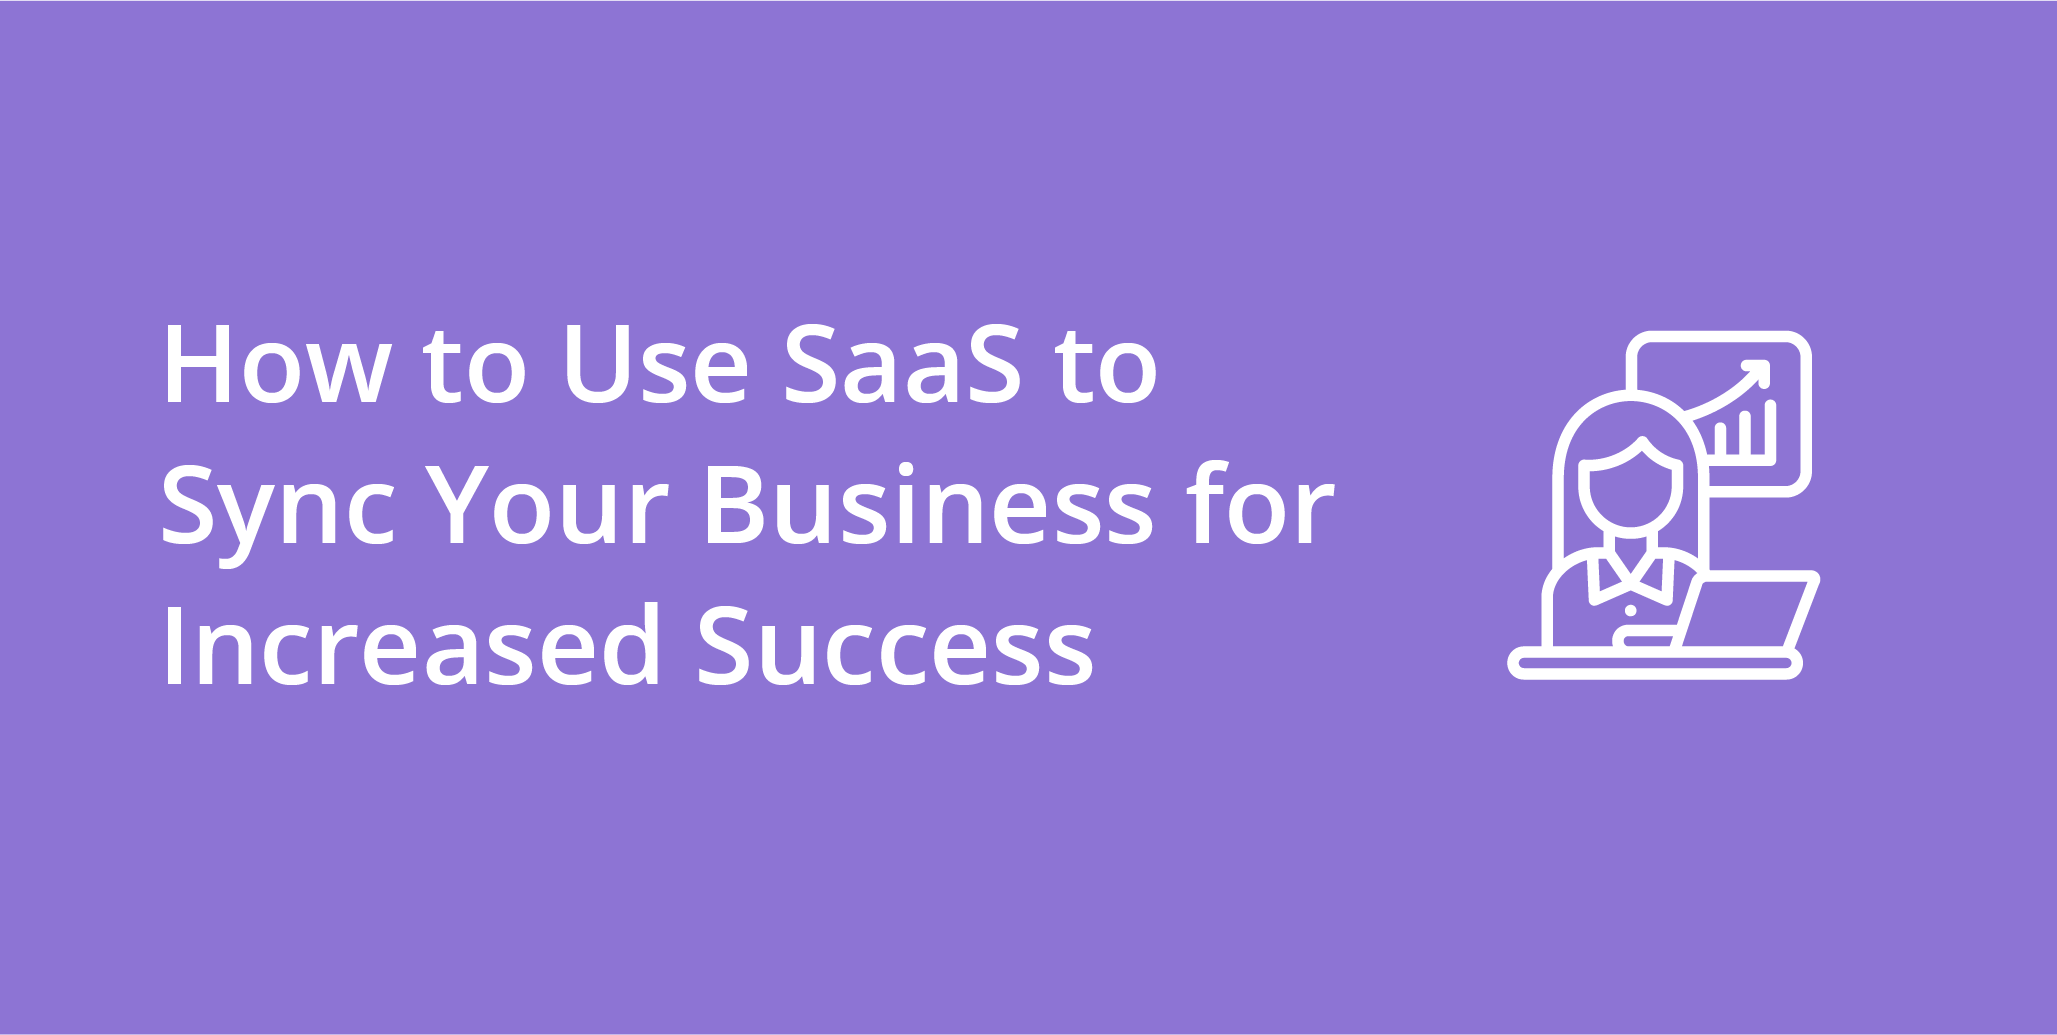 How to Use SaaS to Sync Your Business for Increased Success